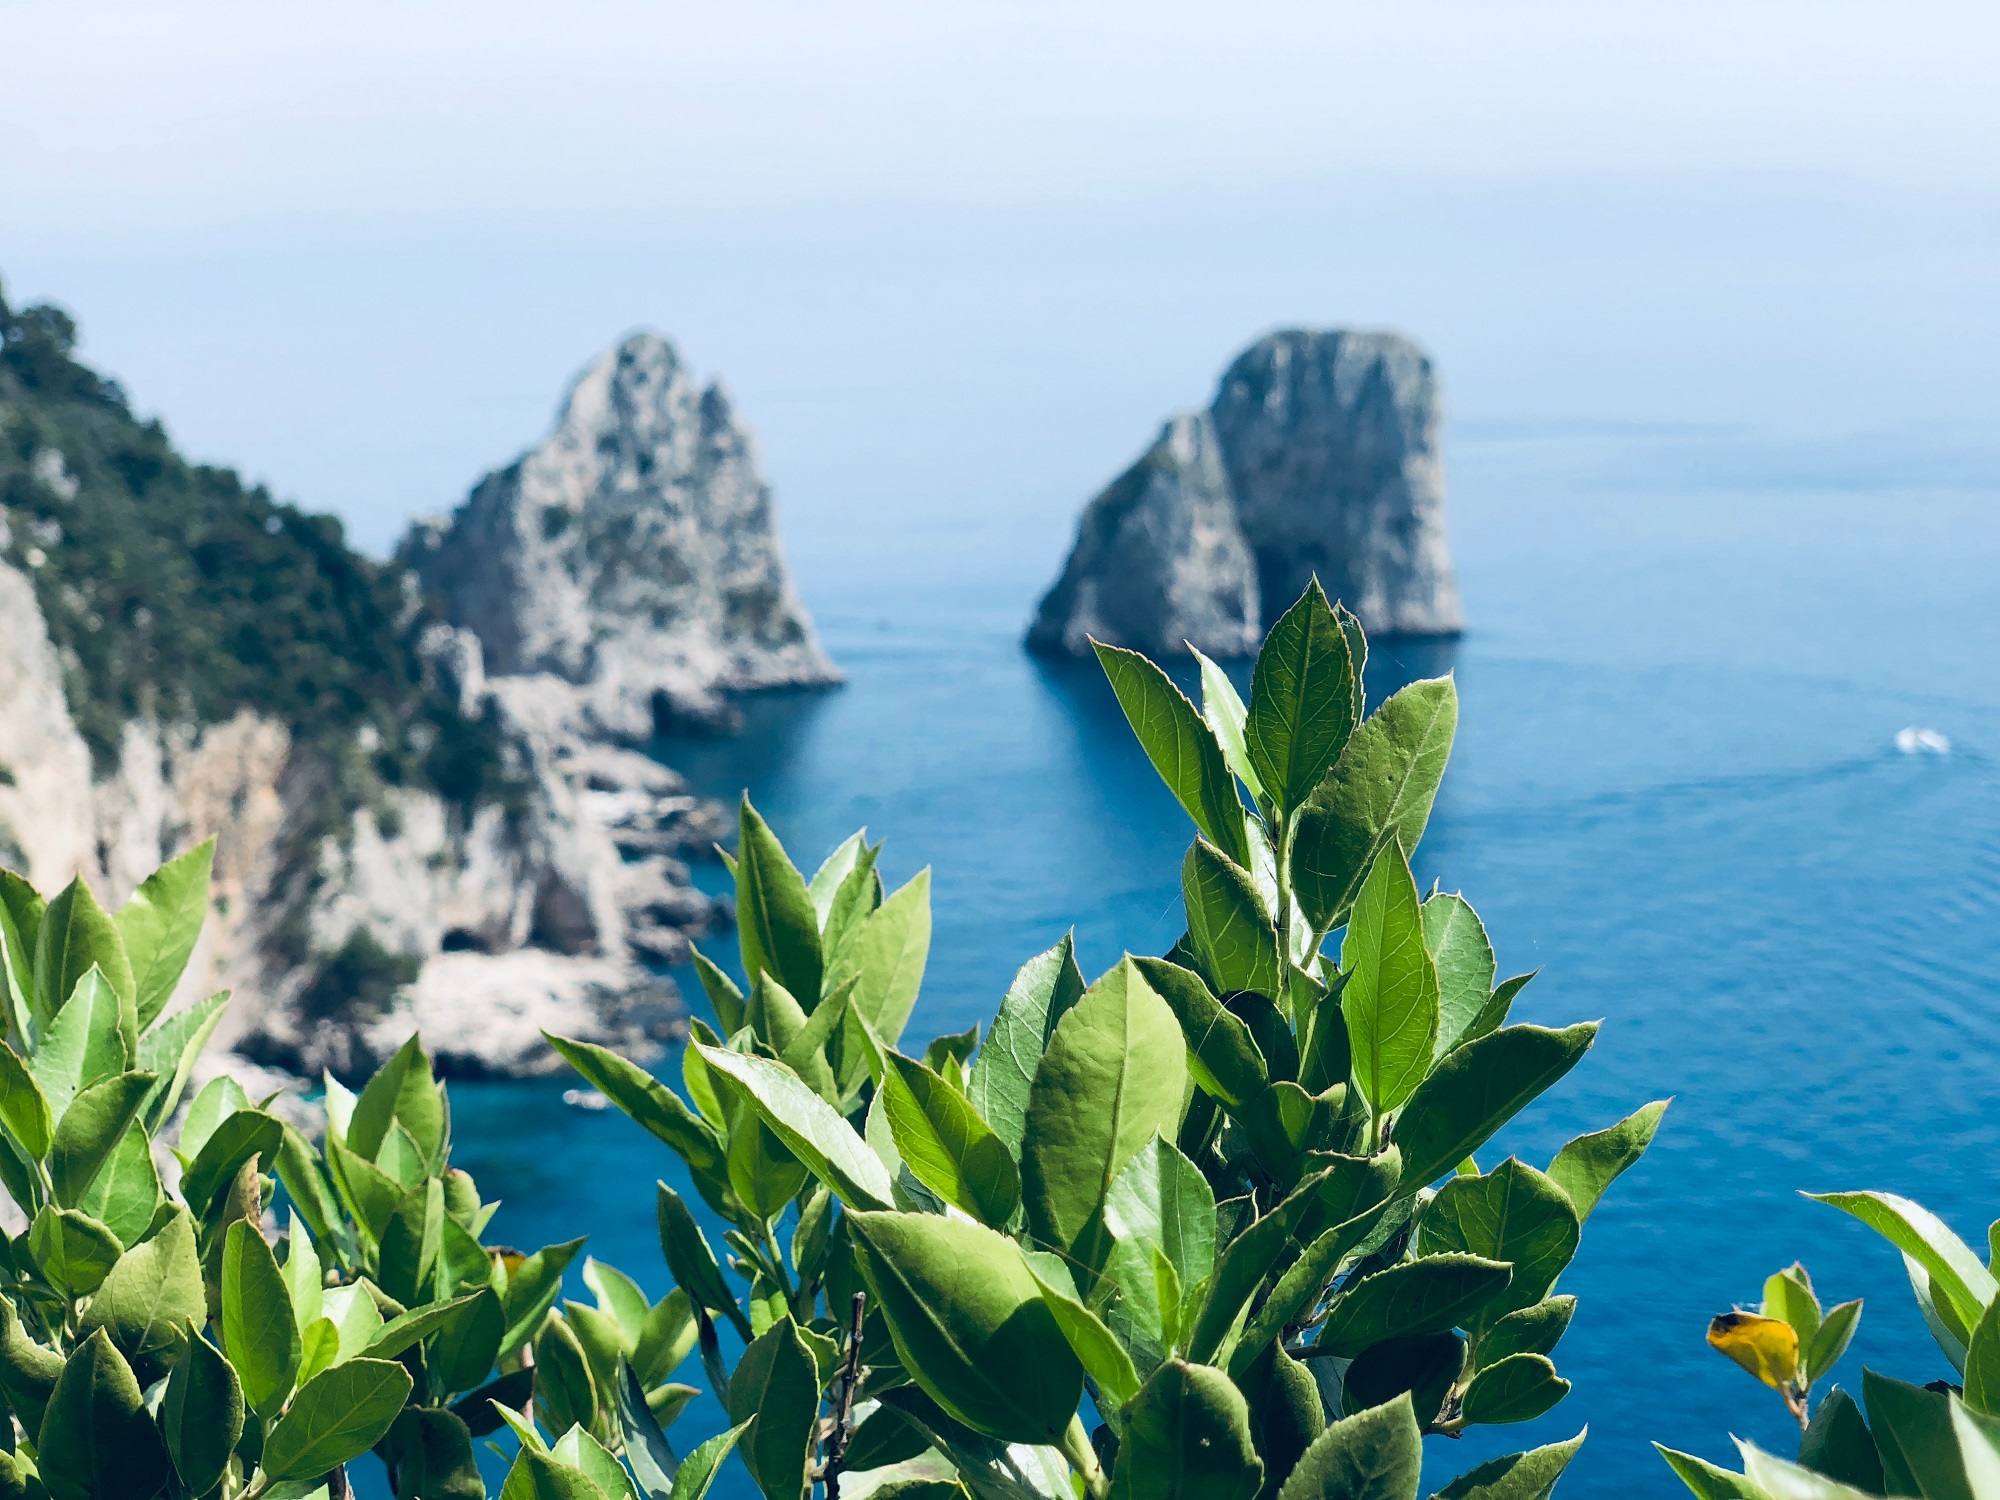 What to see in a day on the Island of Capri?